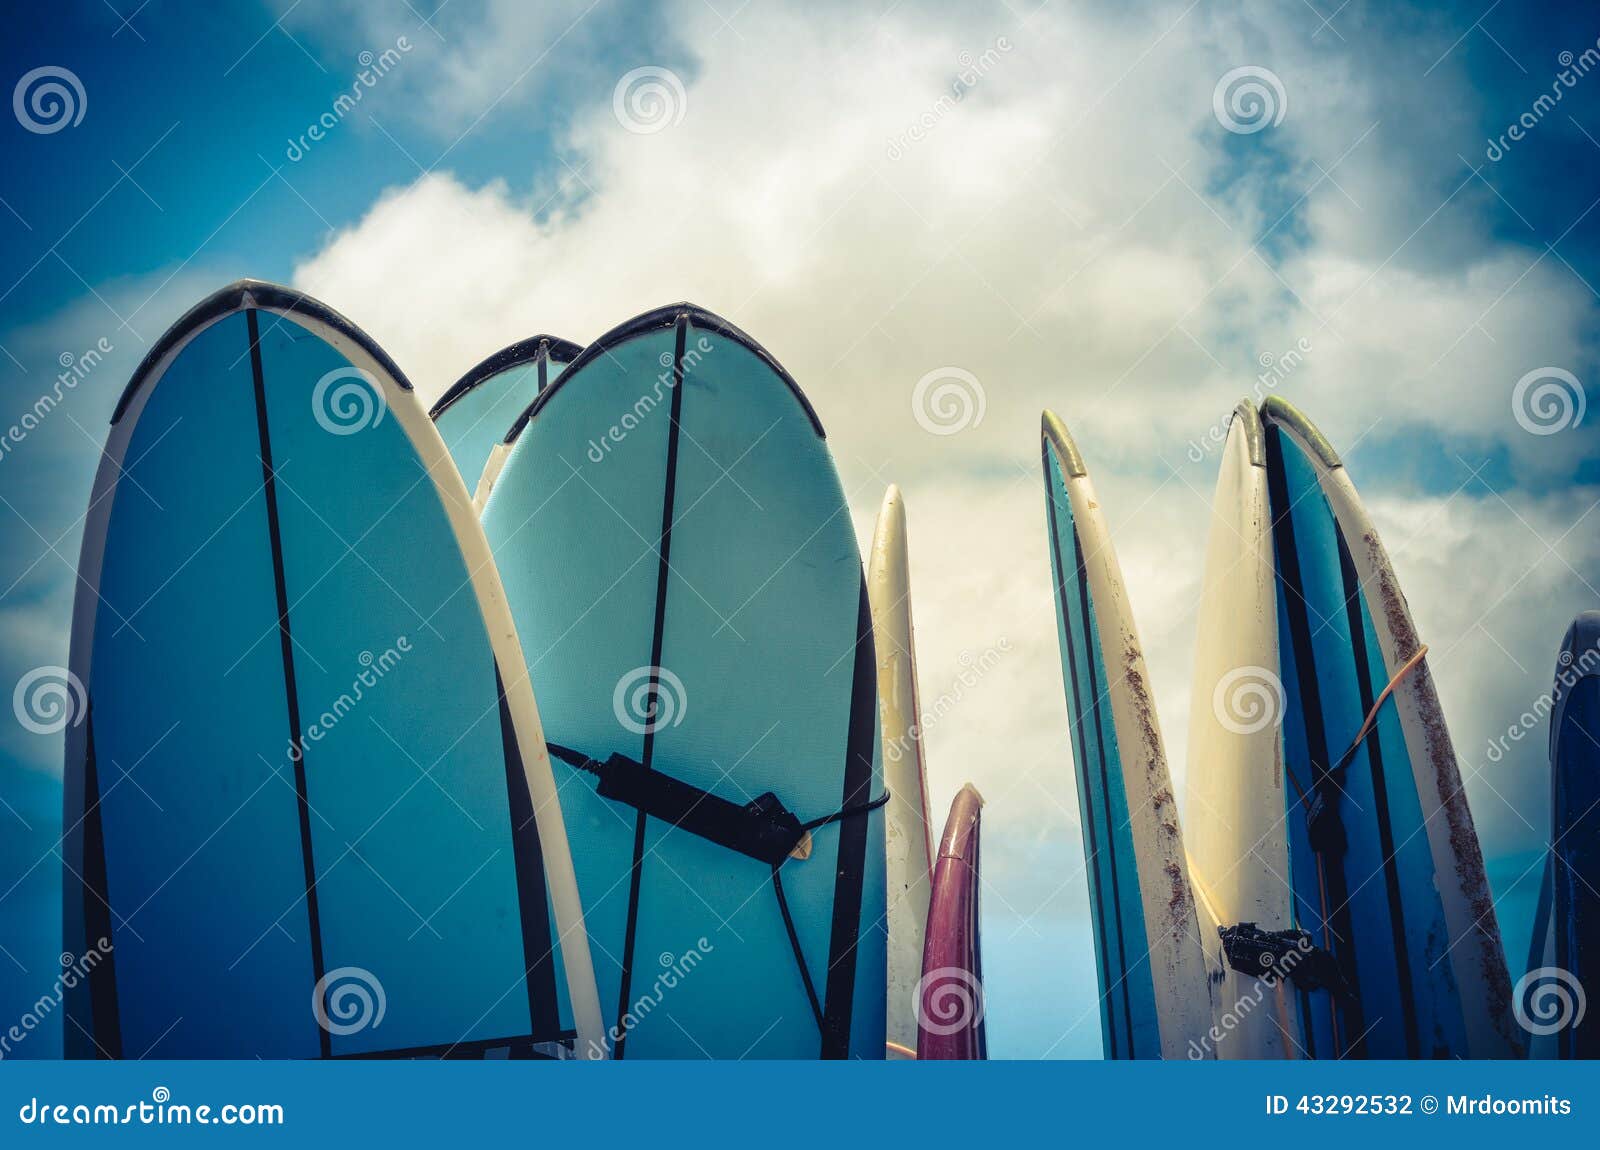 retro styled vintage surf boards in hawaii